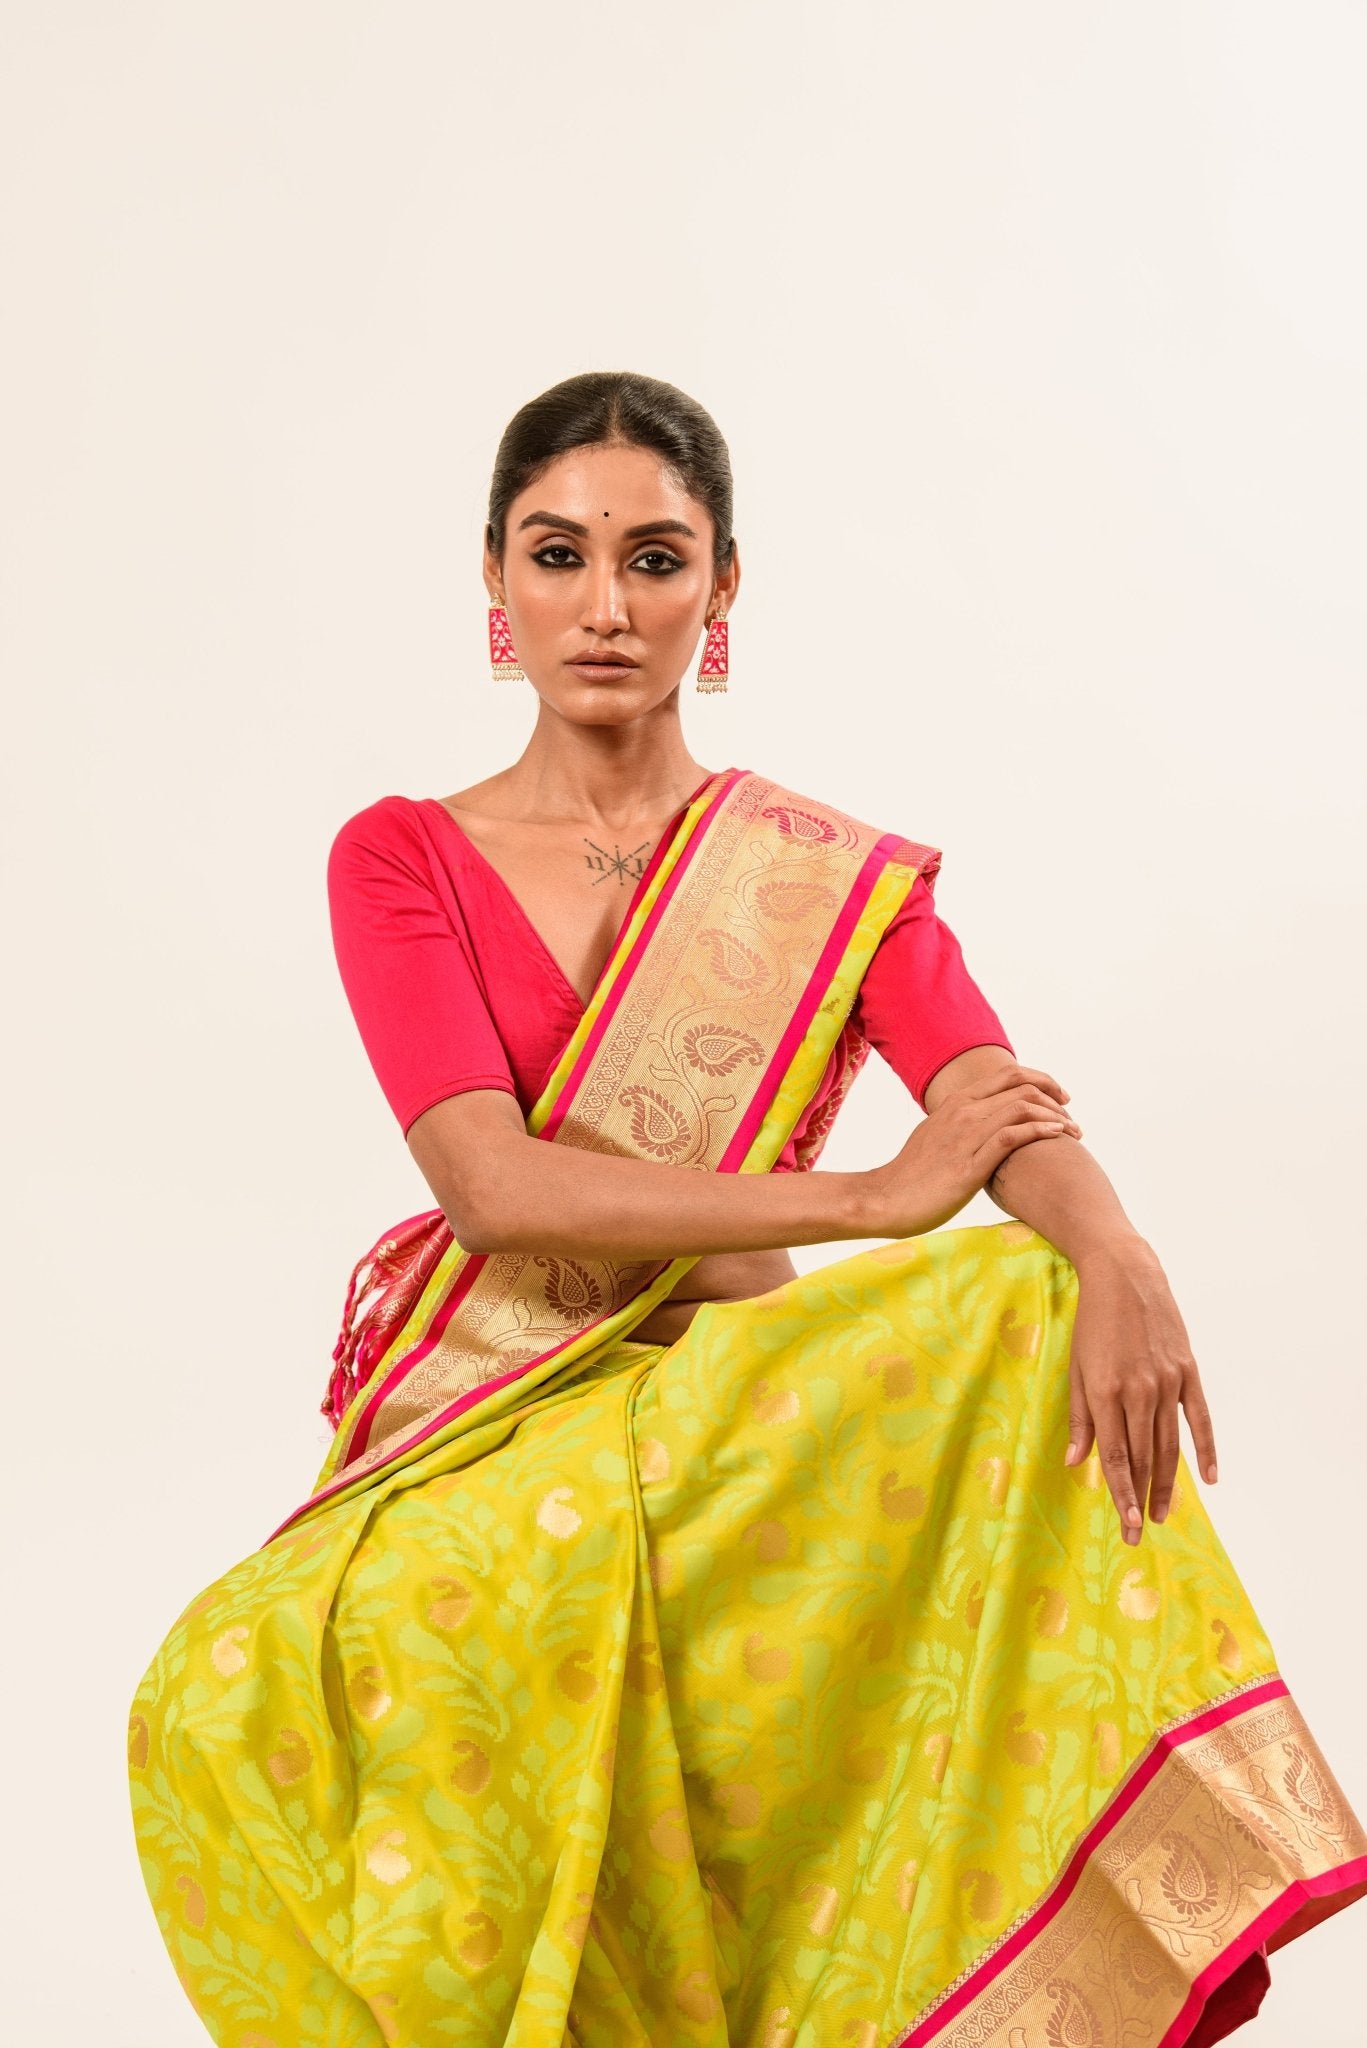 Buy our Floral Lime Green Kanjivaram Pure Silk Saree, perfect blend of traditional and contemporary styles - Anvi Couture.